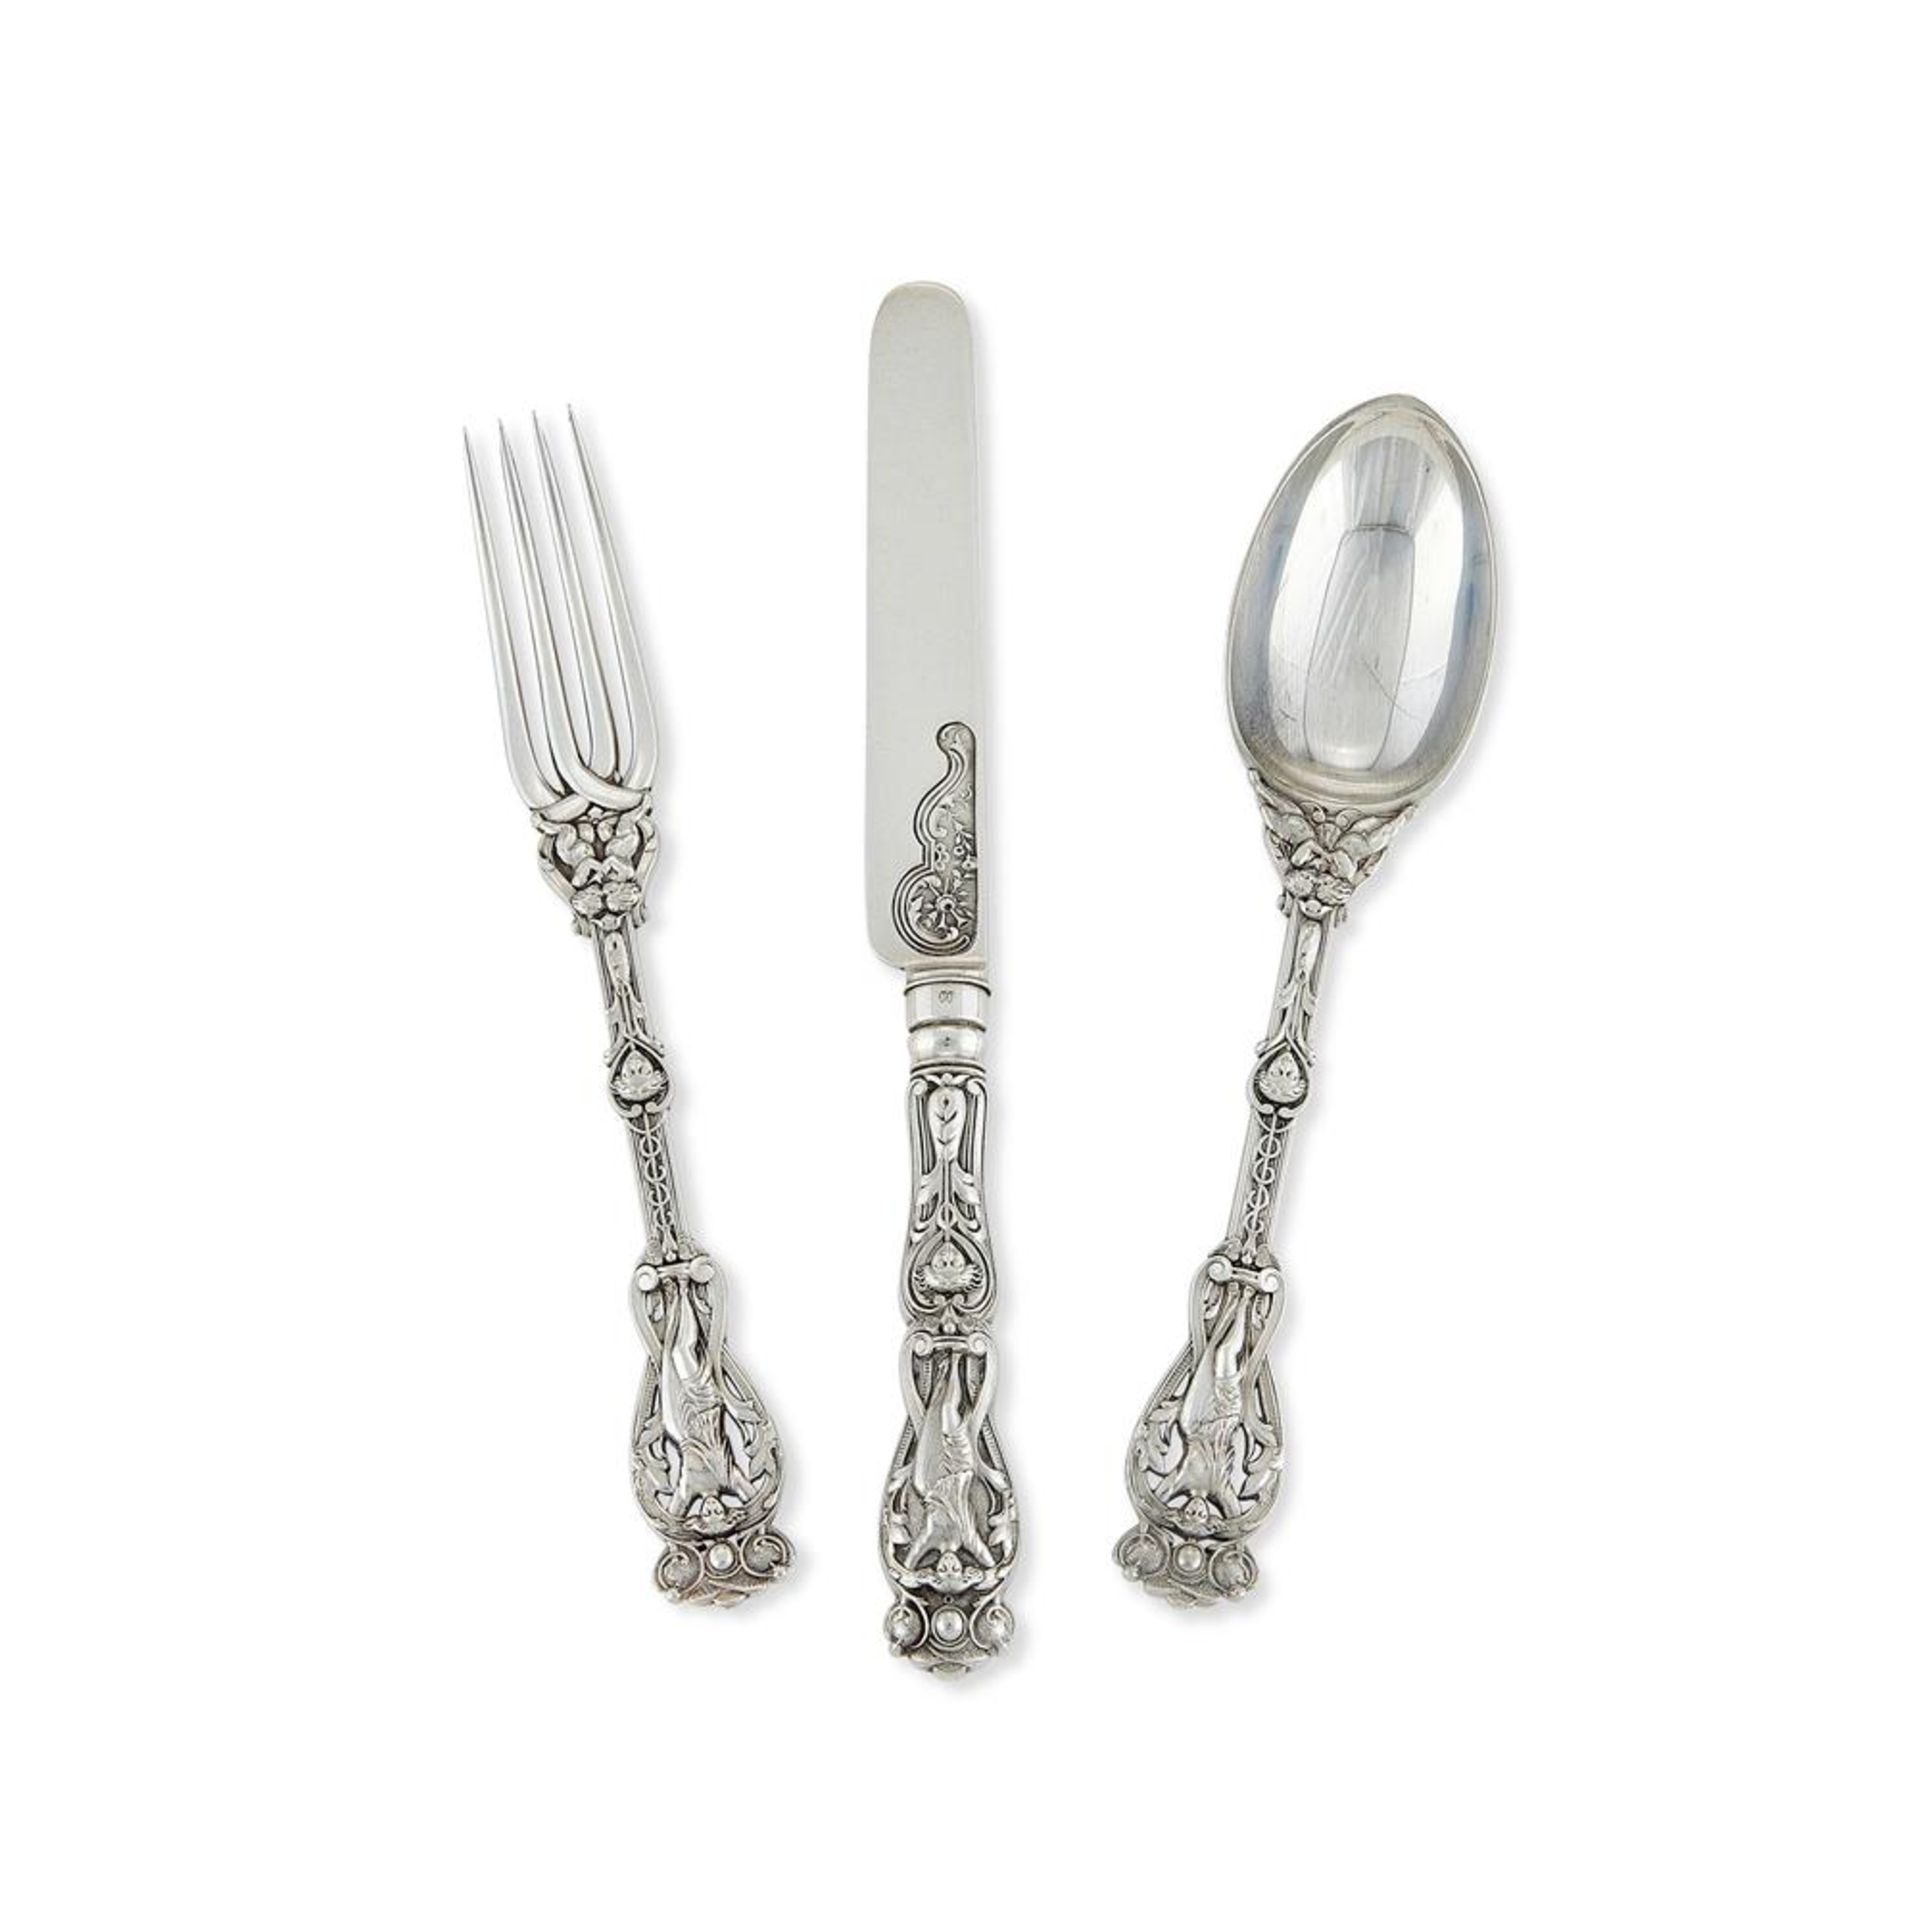 A VICTORIAN CASED SILVER RICH FIGURE PATTERN DESSERT SERVICE FOR TWELVE PLACE SETTINGS